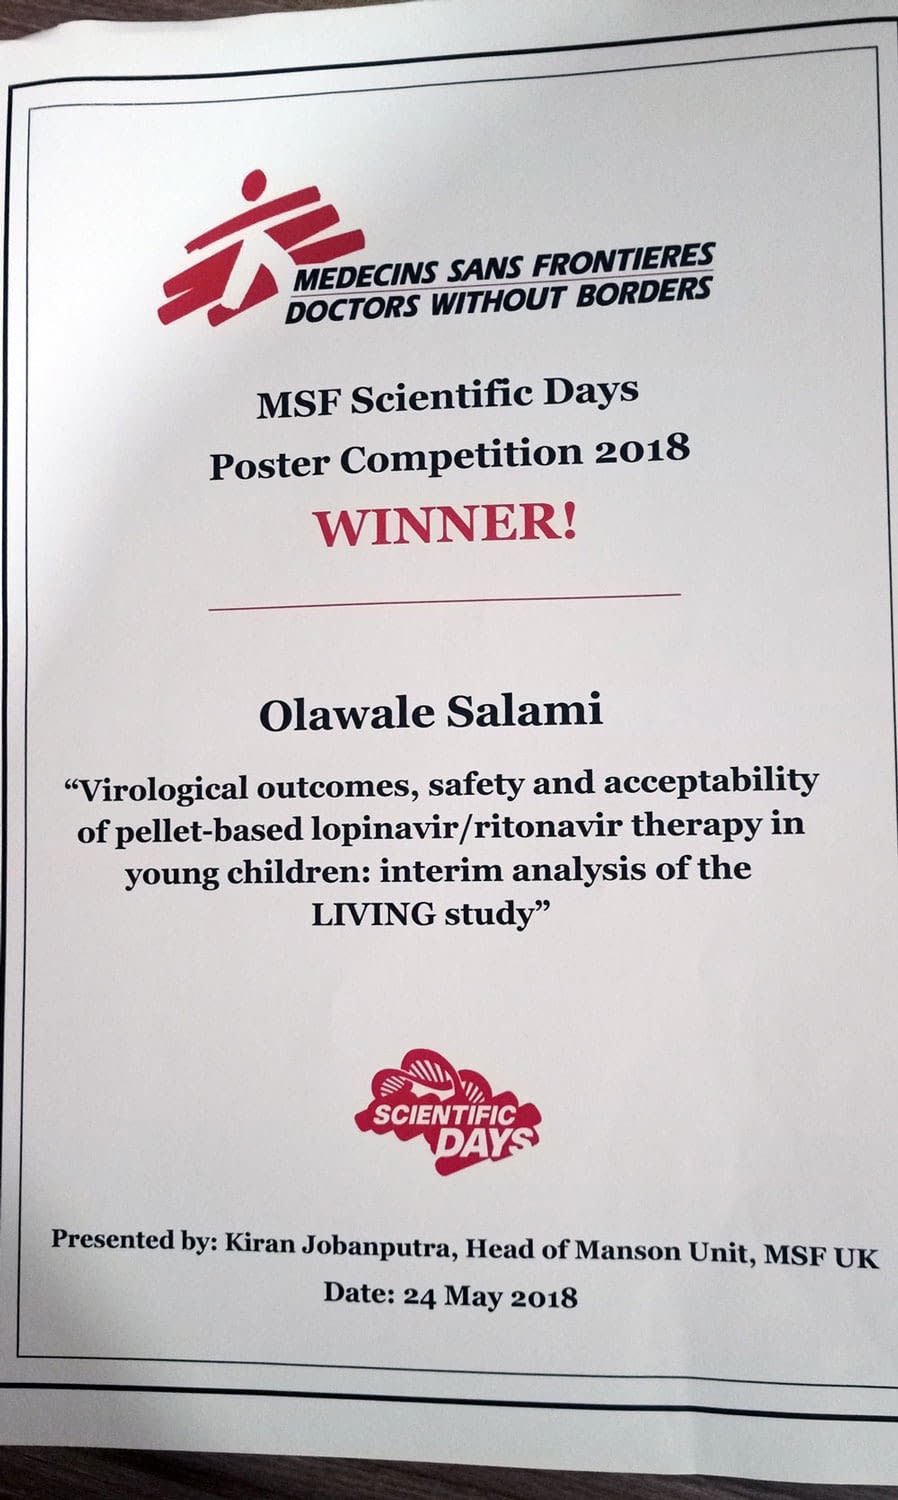 MSF Scientific Days Award for the best poster